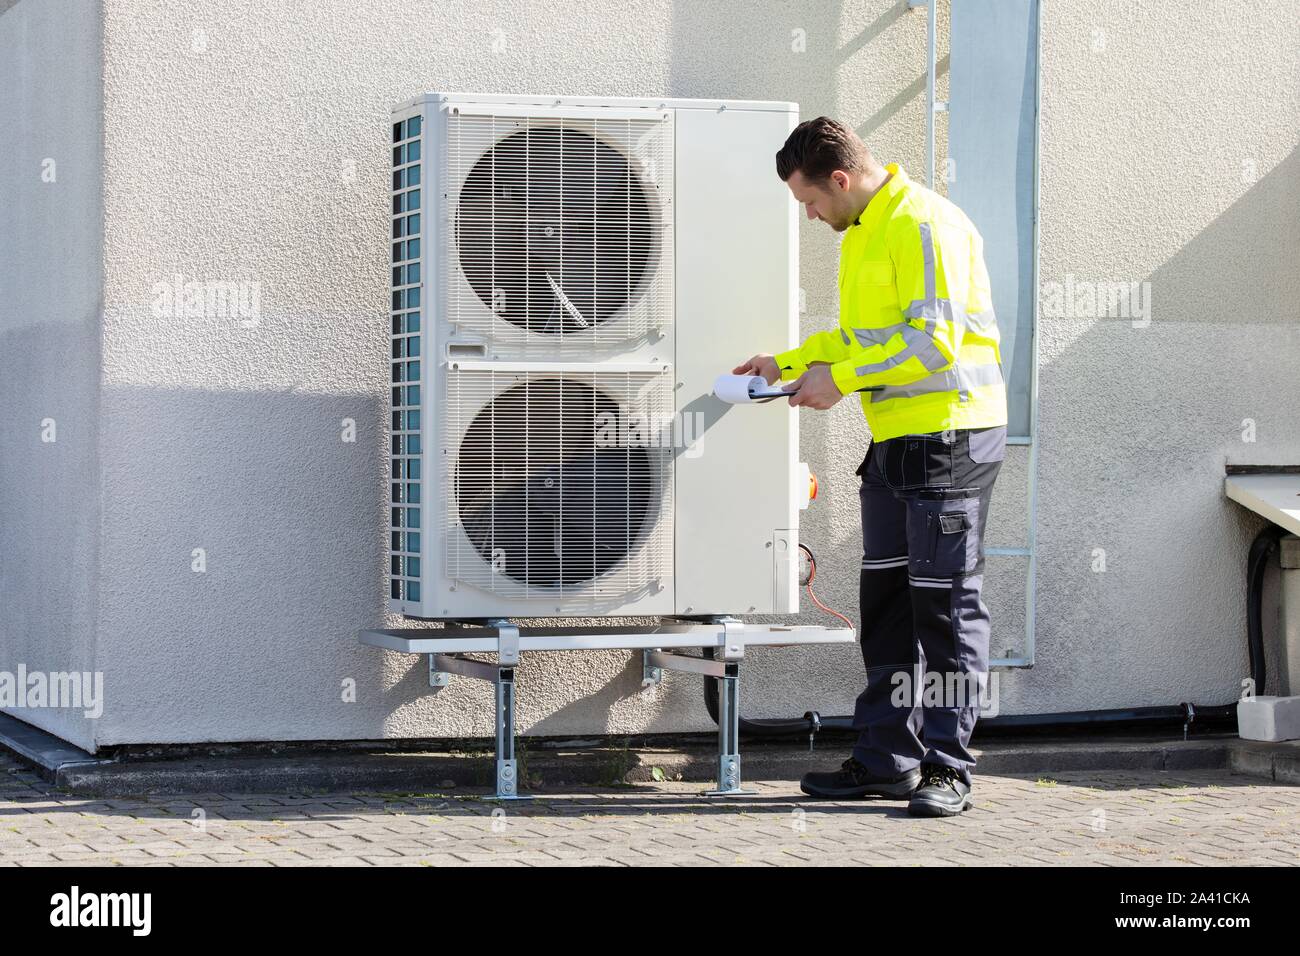 Young Male Technician Wearing Safety Jacket Looking At Air Conditioner Unit Making Notes Stock Photo